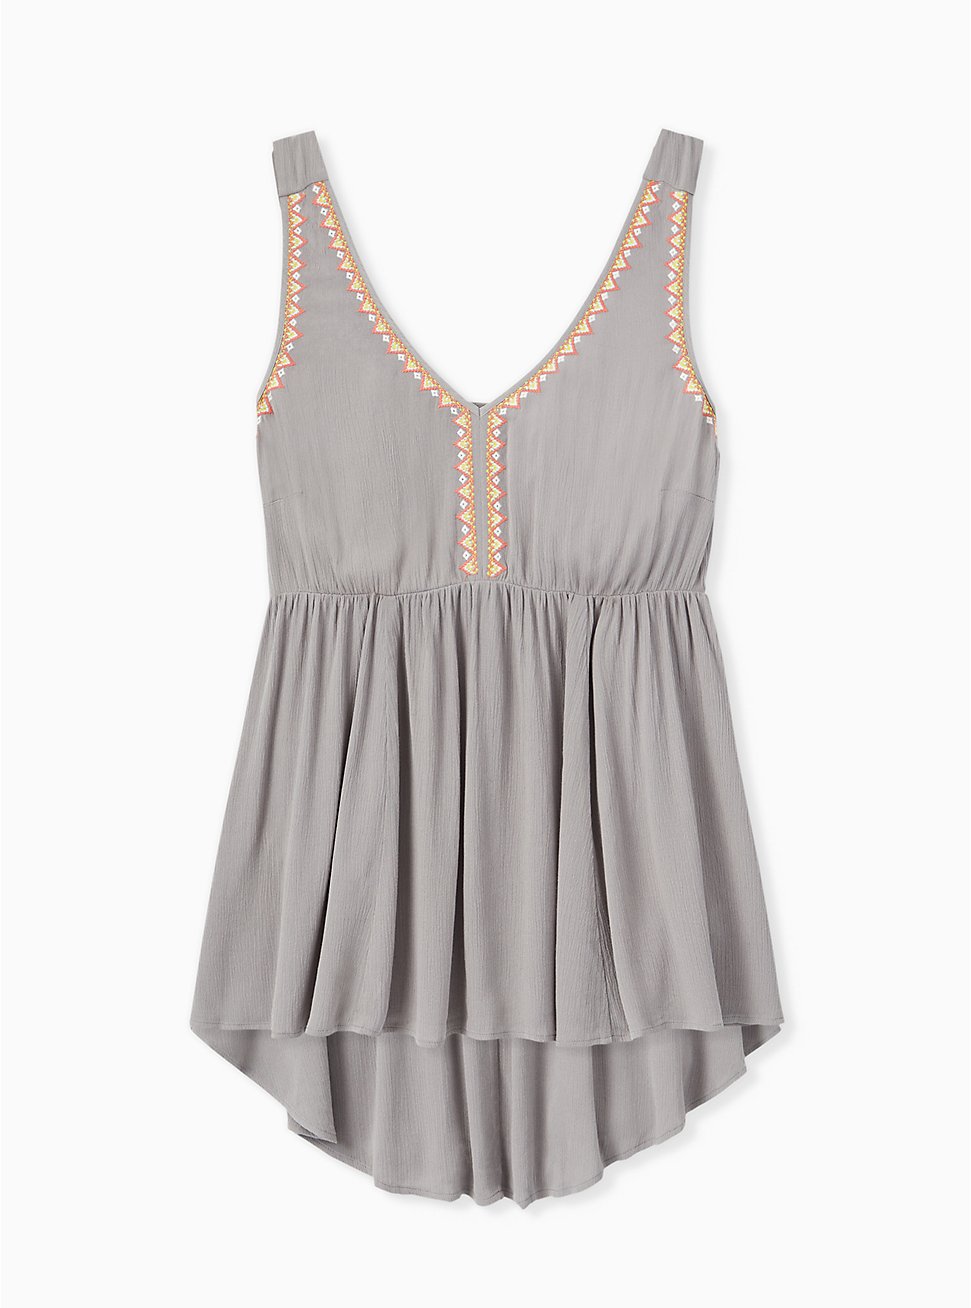 Babydoll Gauze Embroidered Tank, FROST GRAY, hi-res